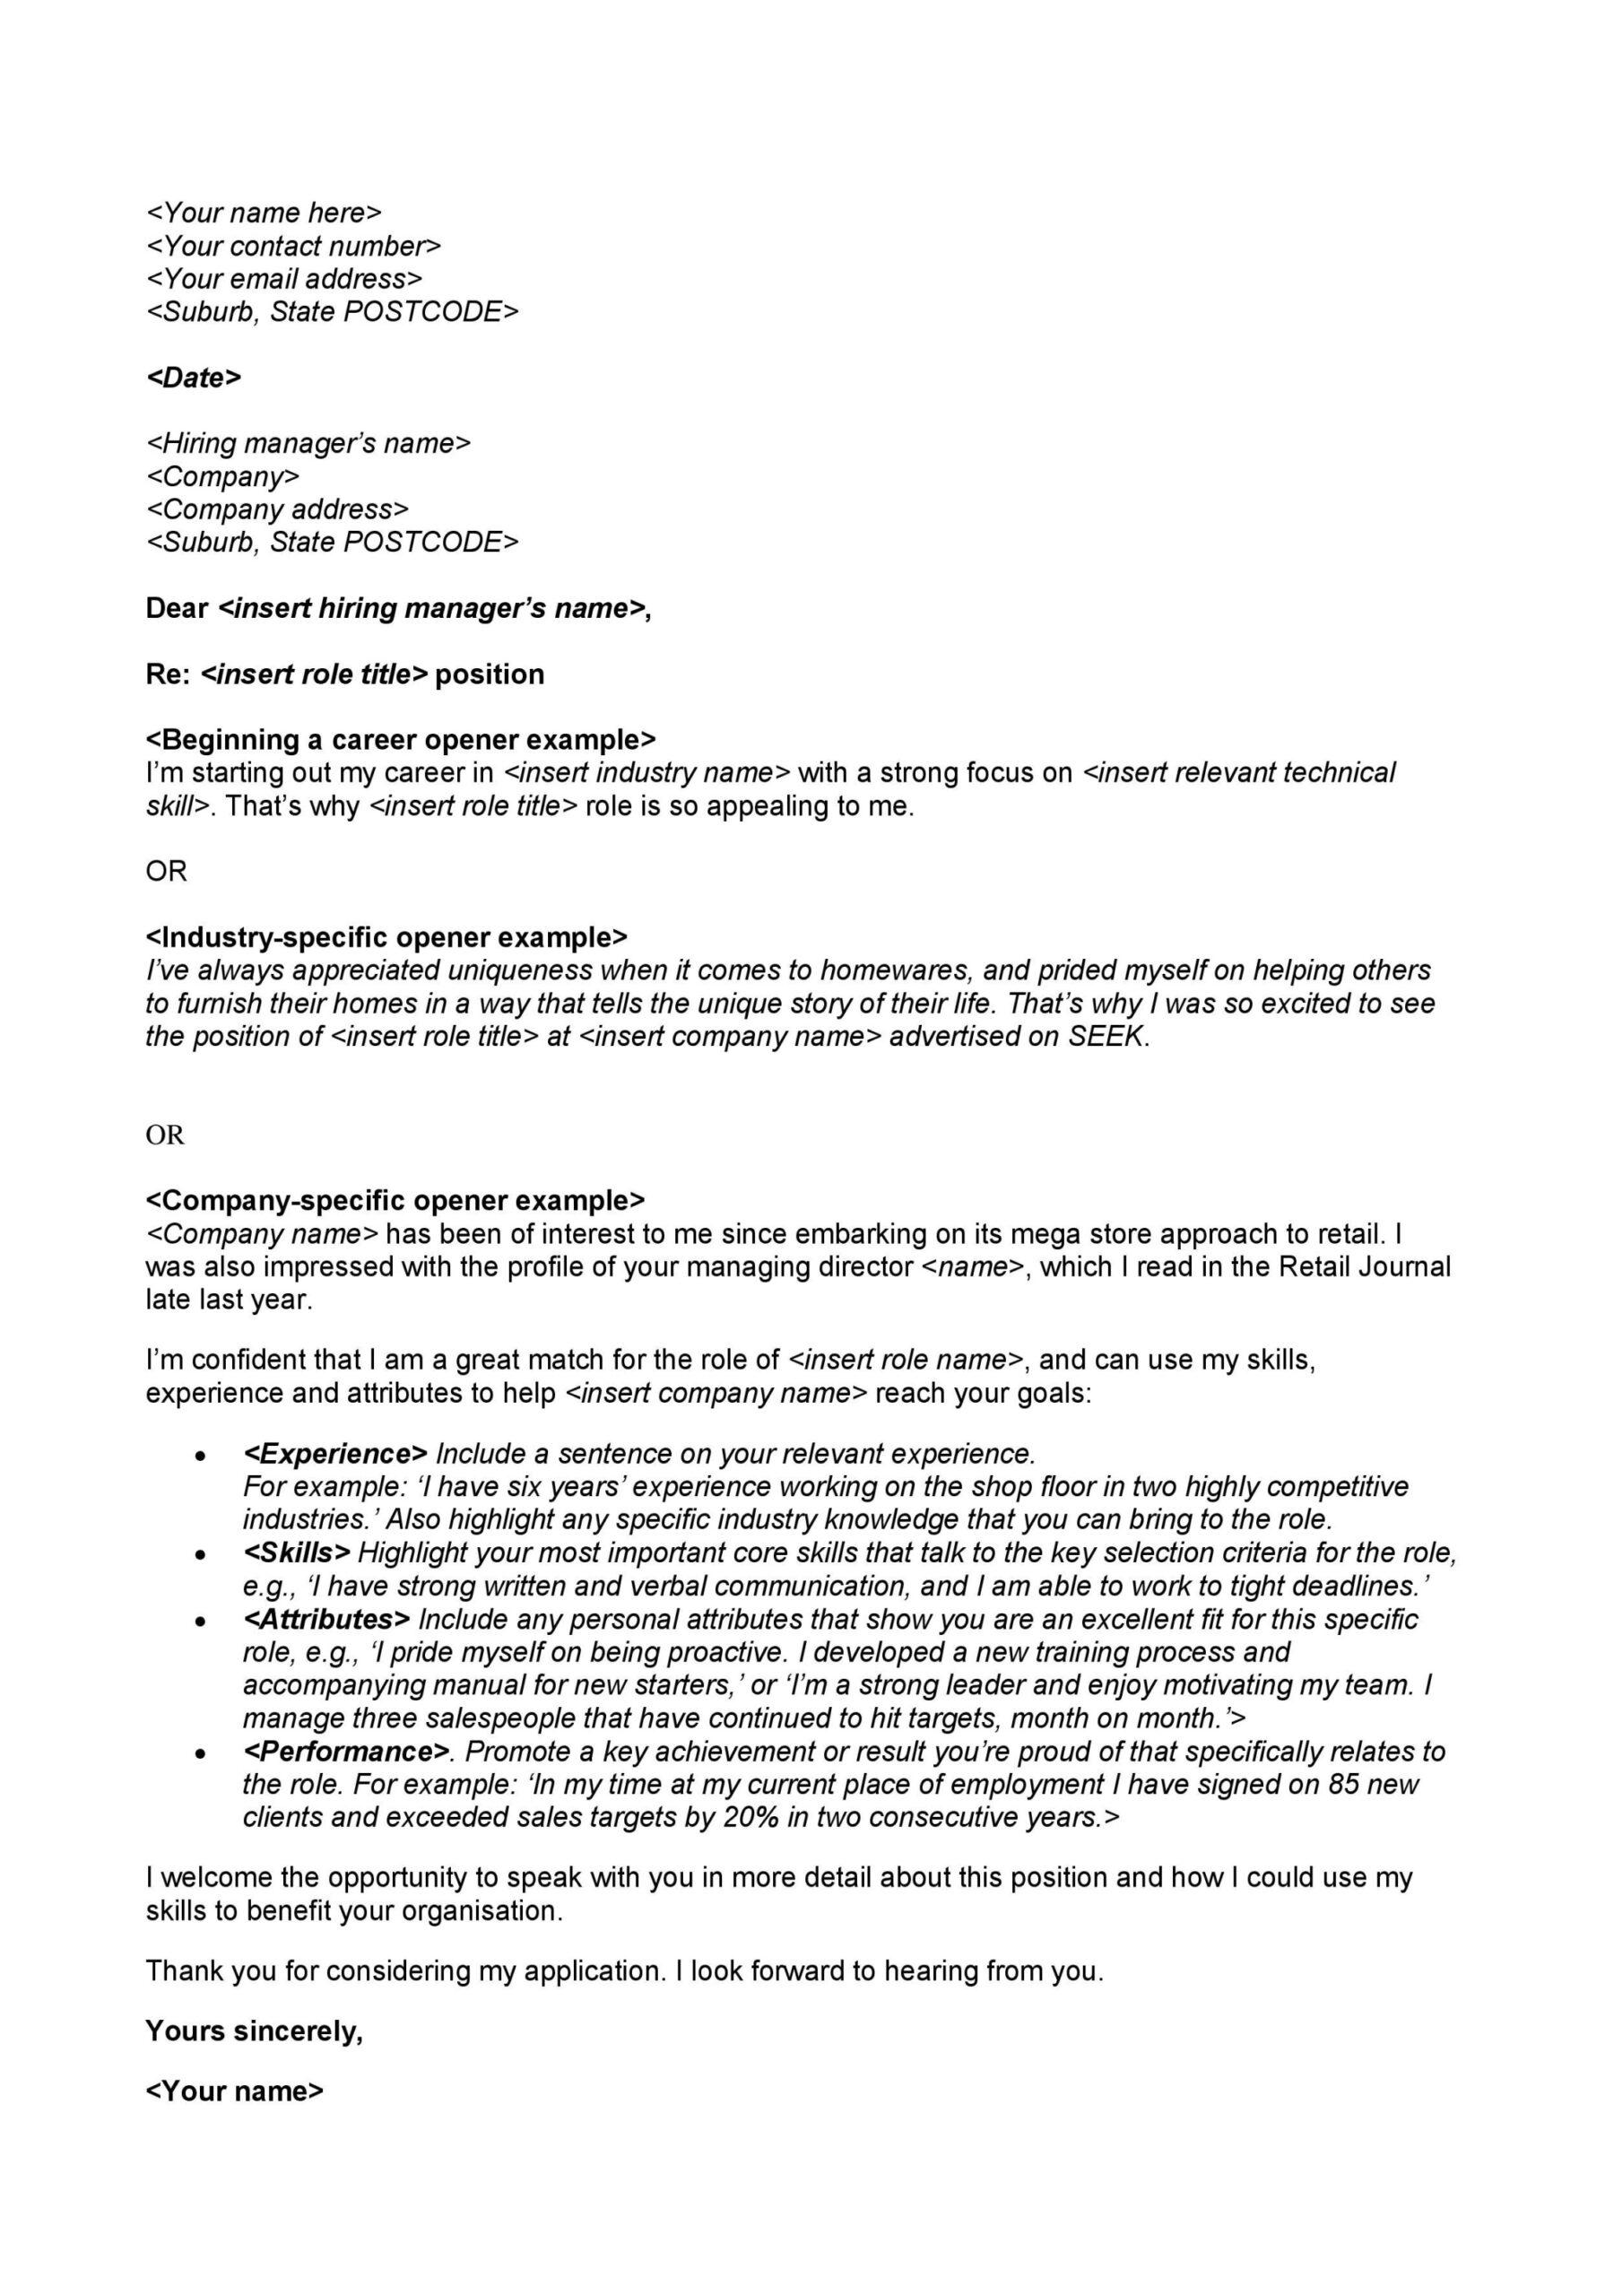 Free cover letter template - SEEK